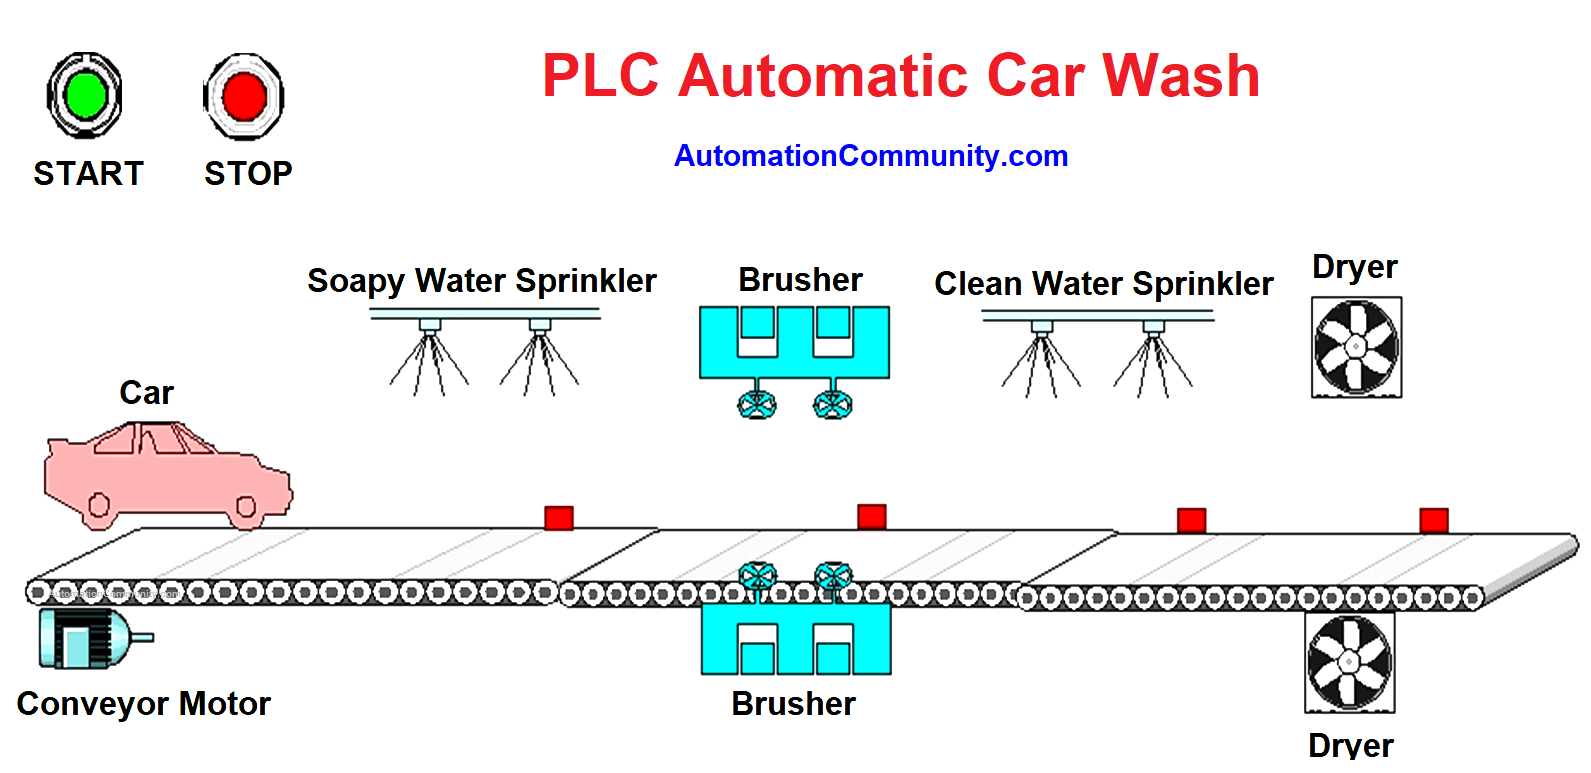 Automatic Car Wash with PLC